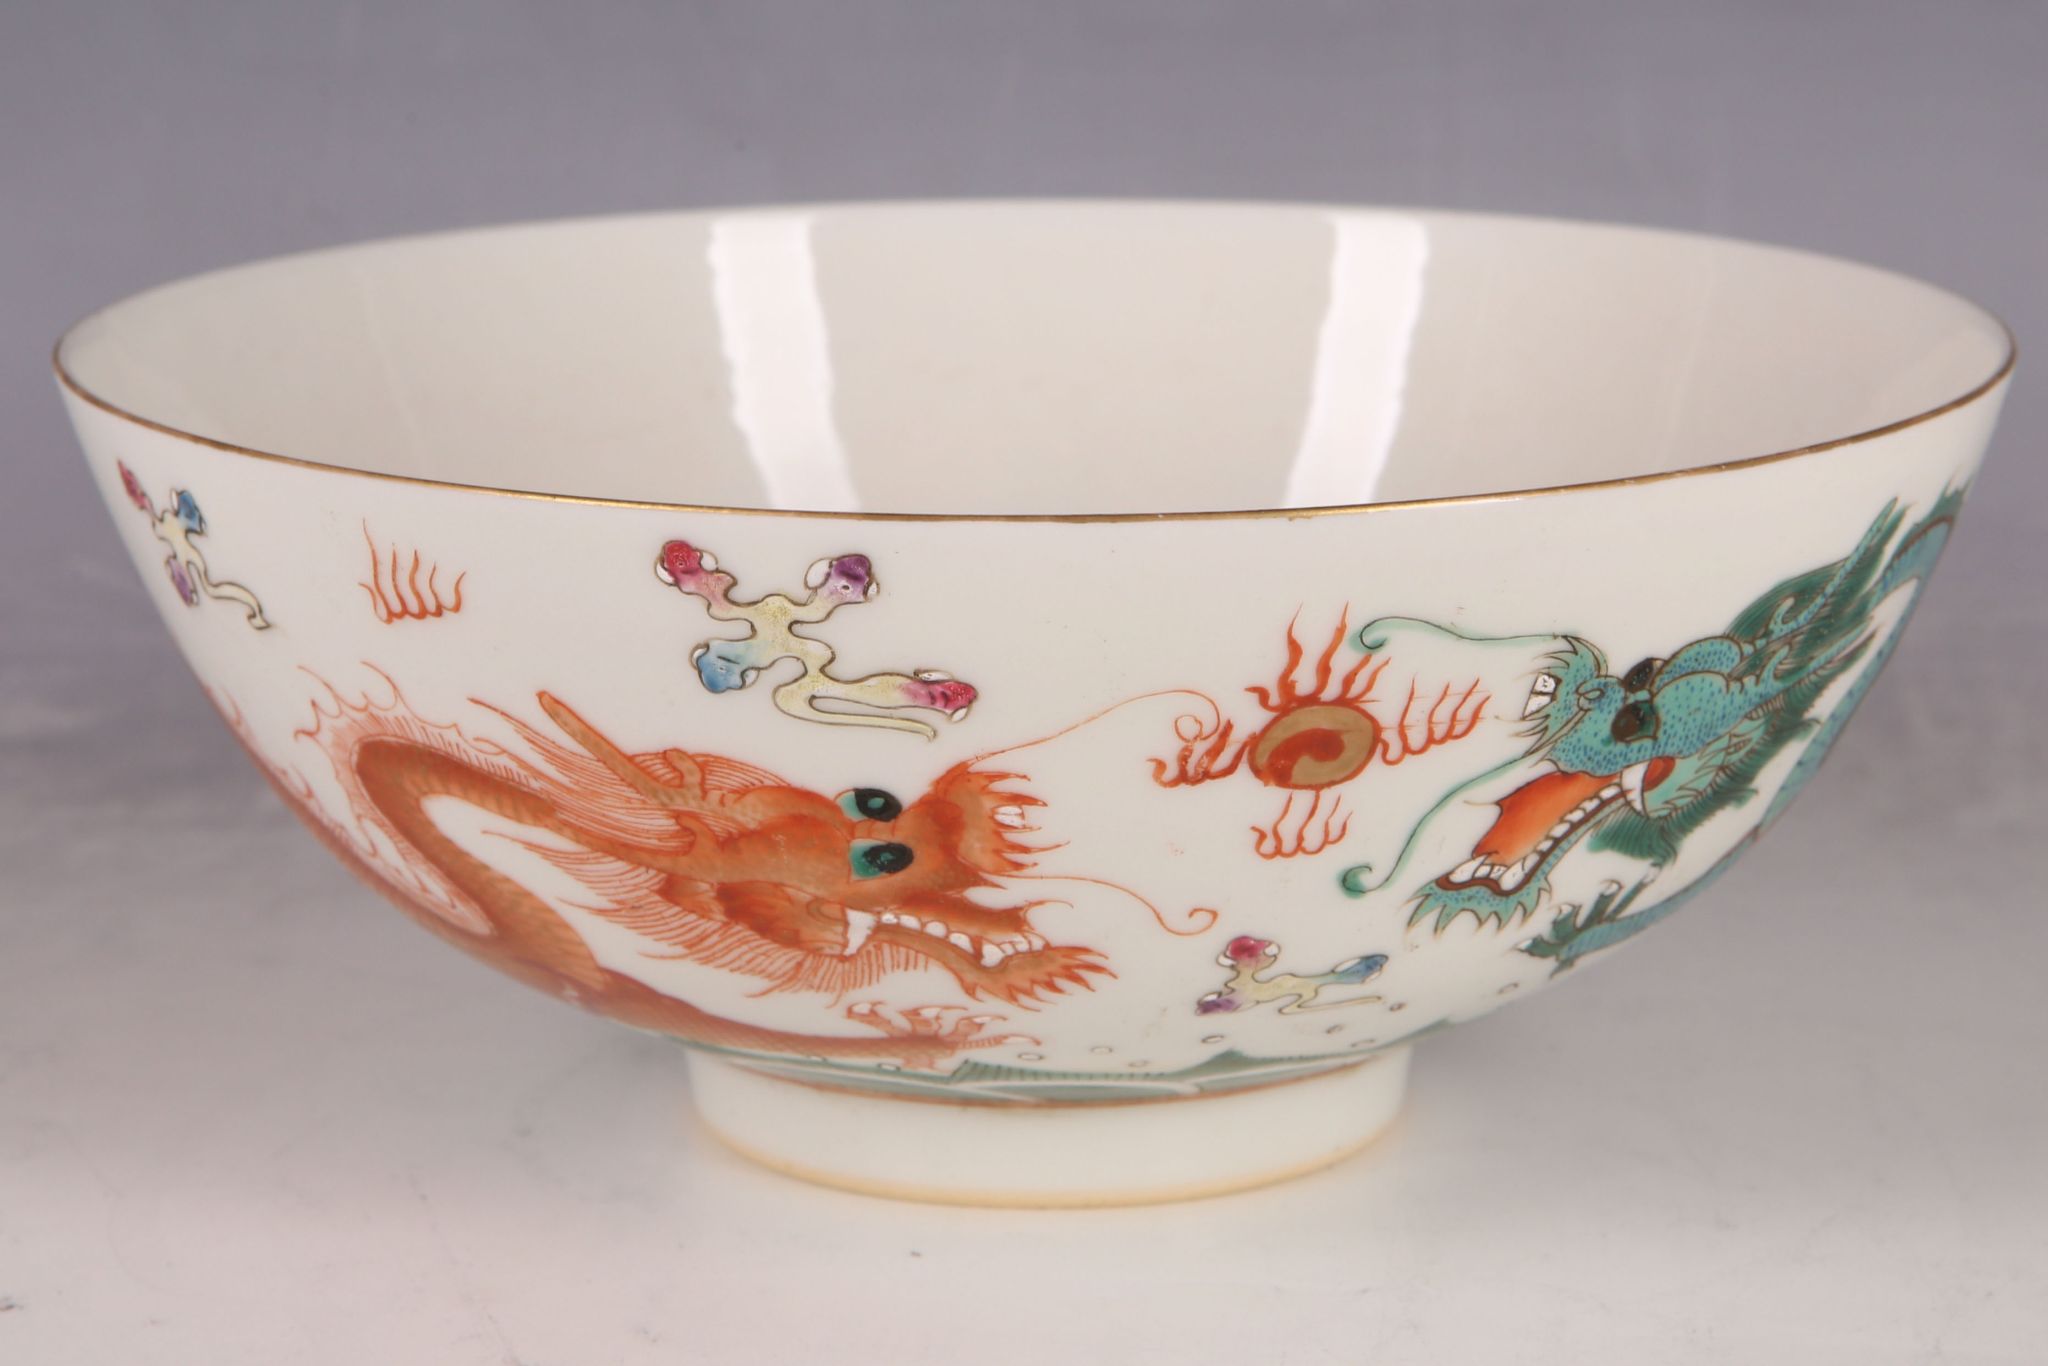 A Chinese bowl, Daoguang style mark to base, red symbol to inner surrounded by bats, with red and